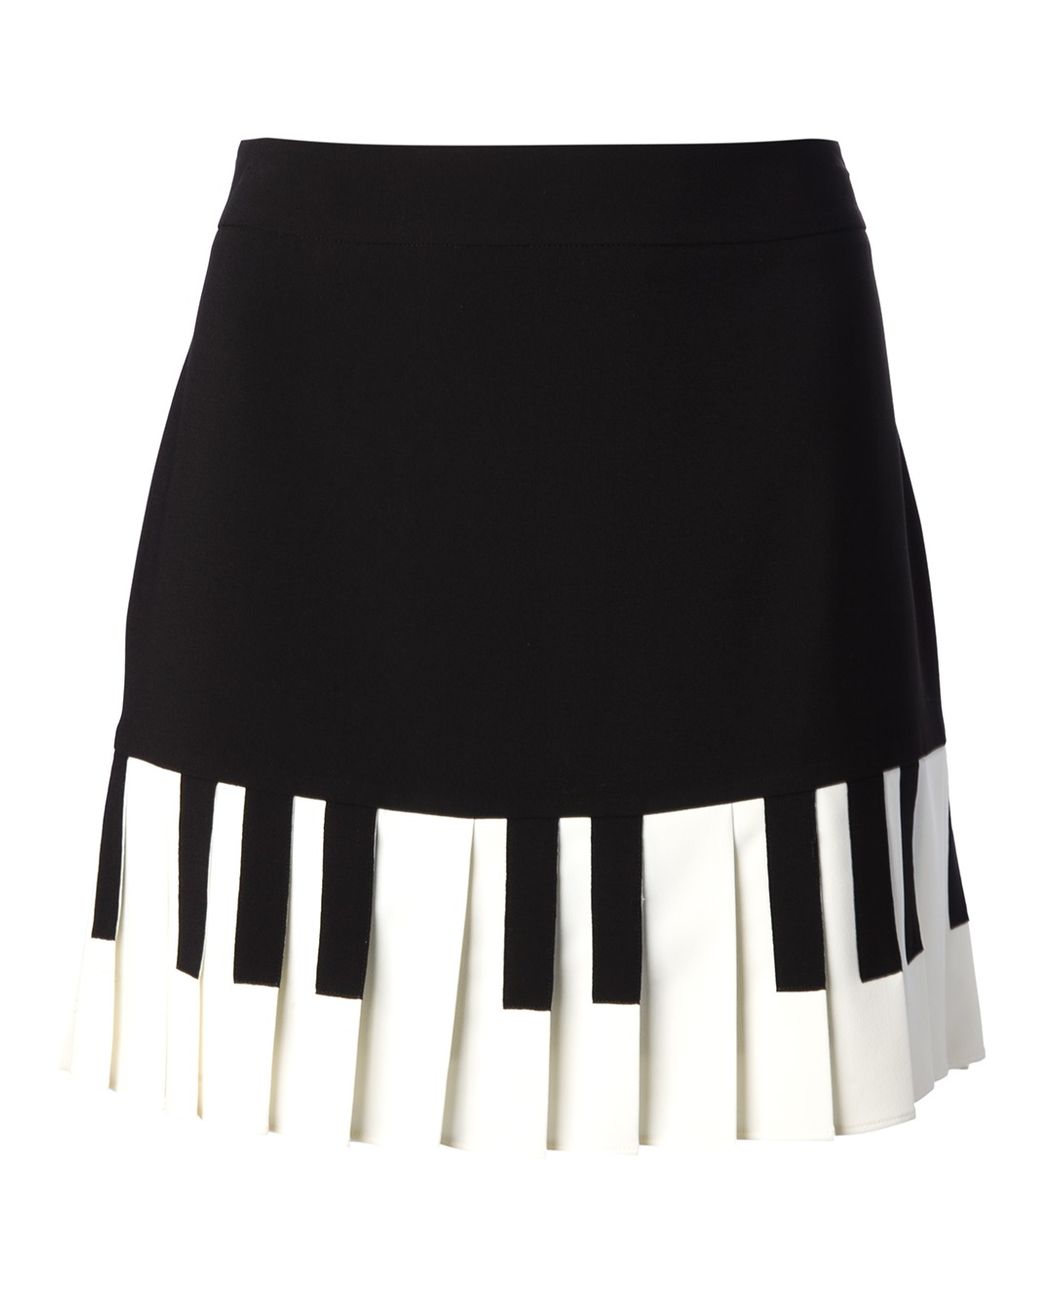 Boutique Moschino Pleated Piano Key Skirt in Black | Lyst